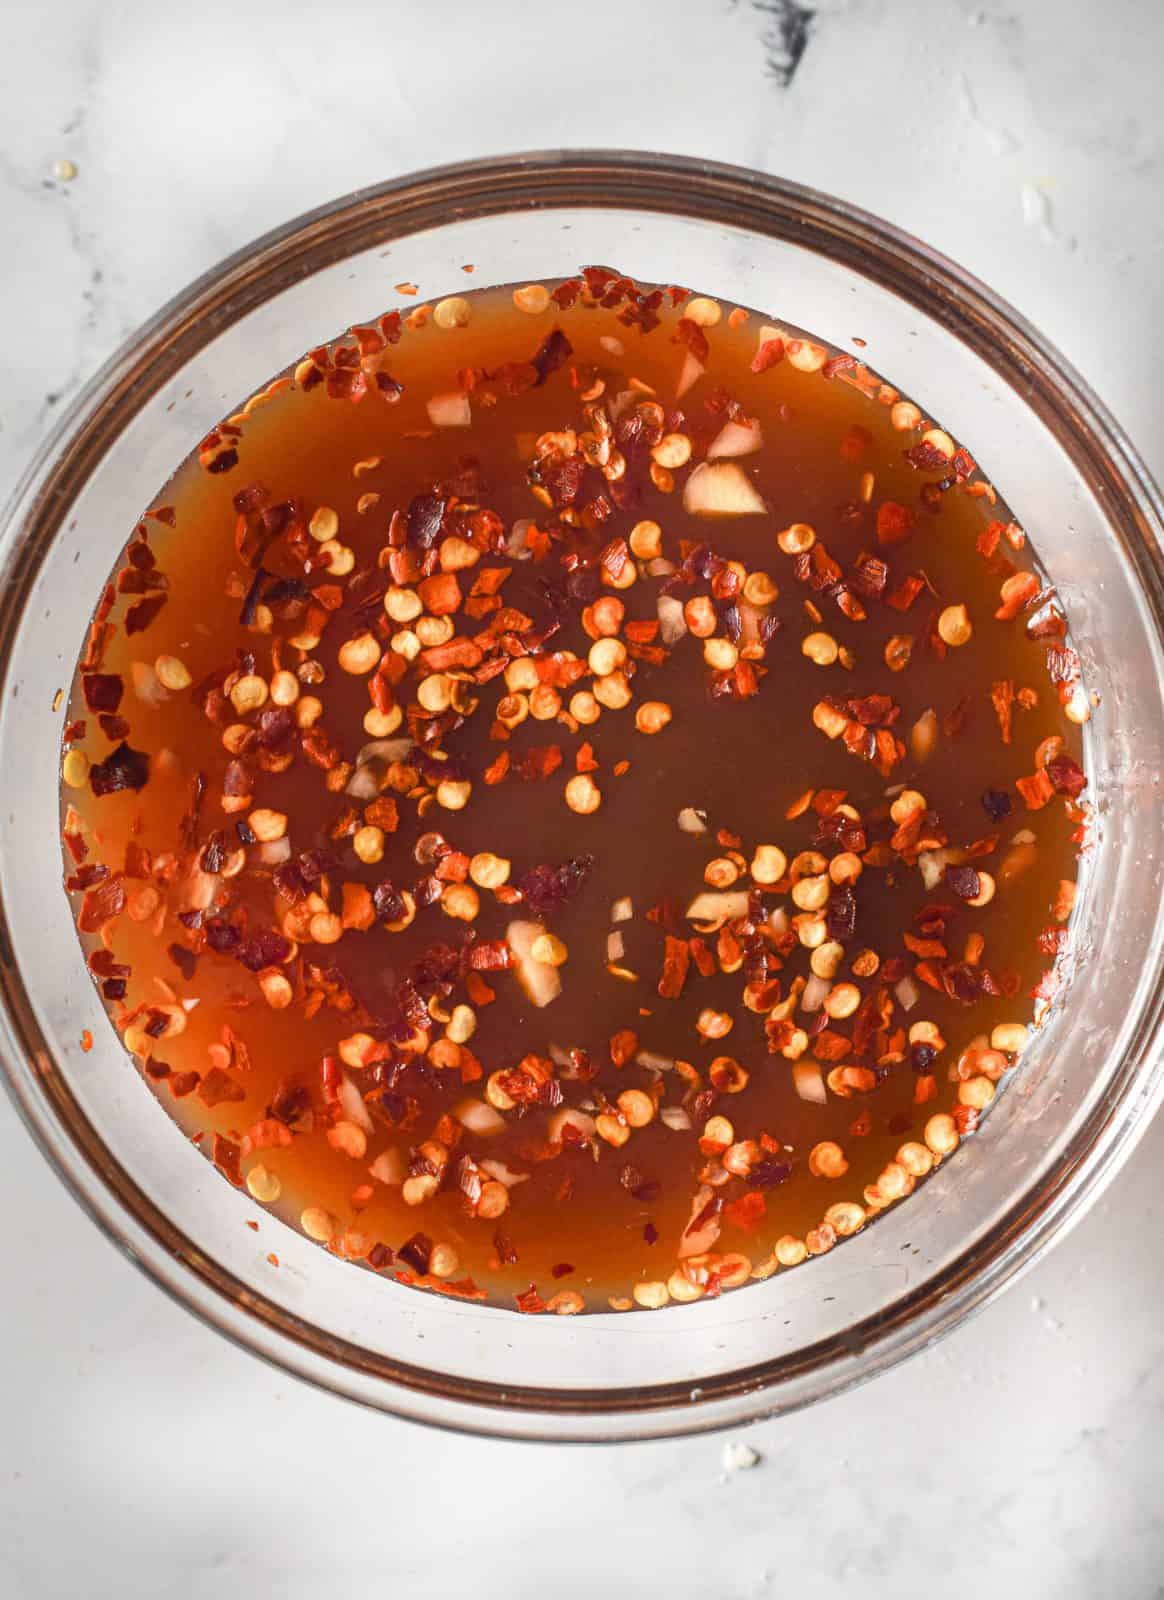 ranch sauce mixture shown in a clear bowl.